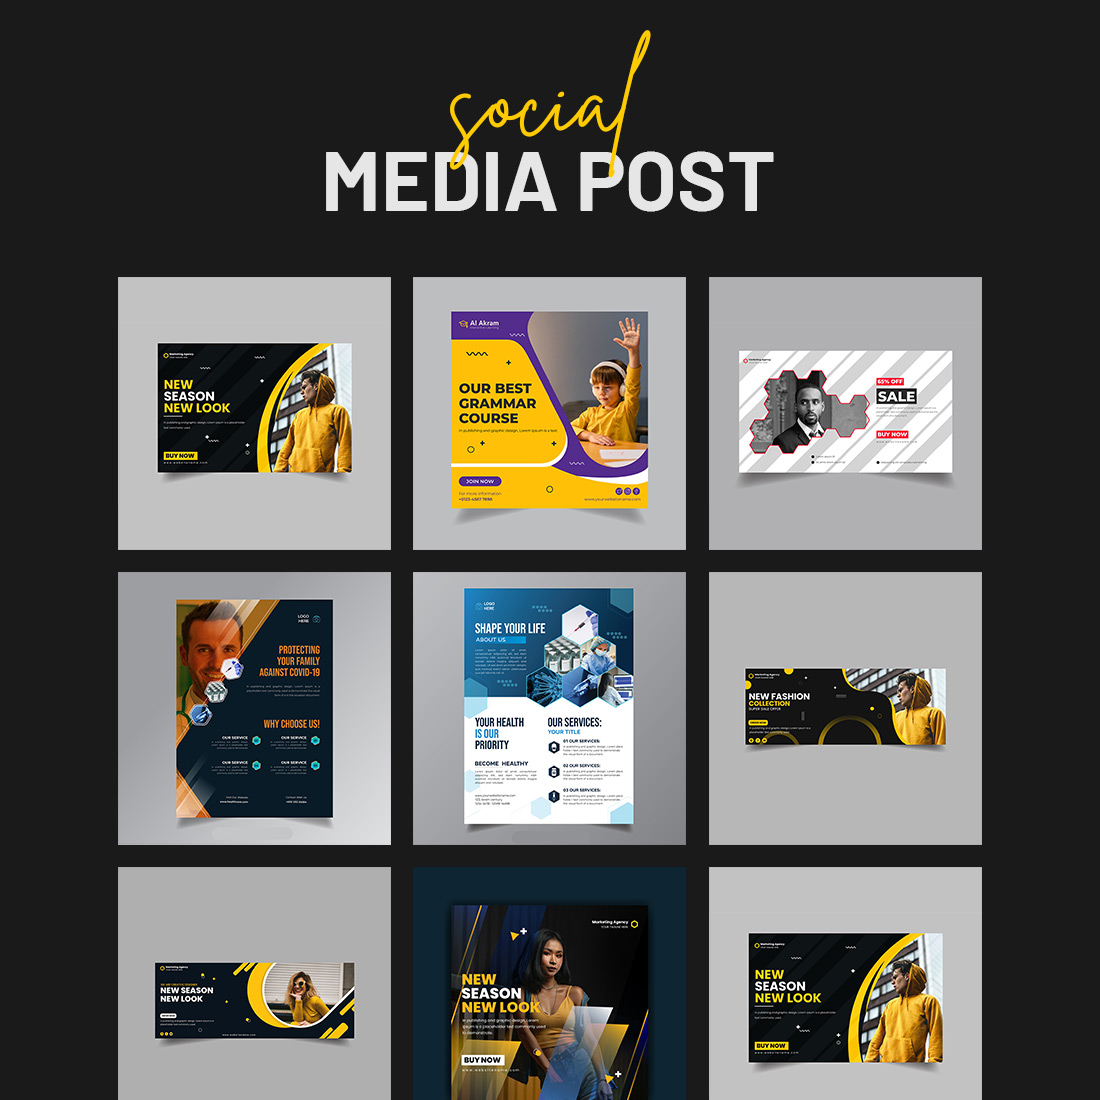 8+Beautiful flyer or social media posts templates- only $4 cover image.